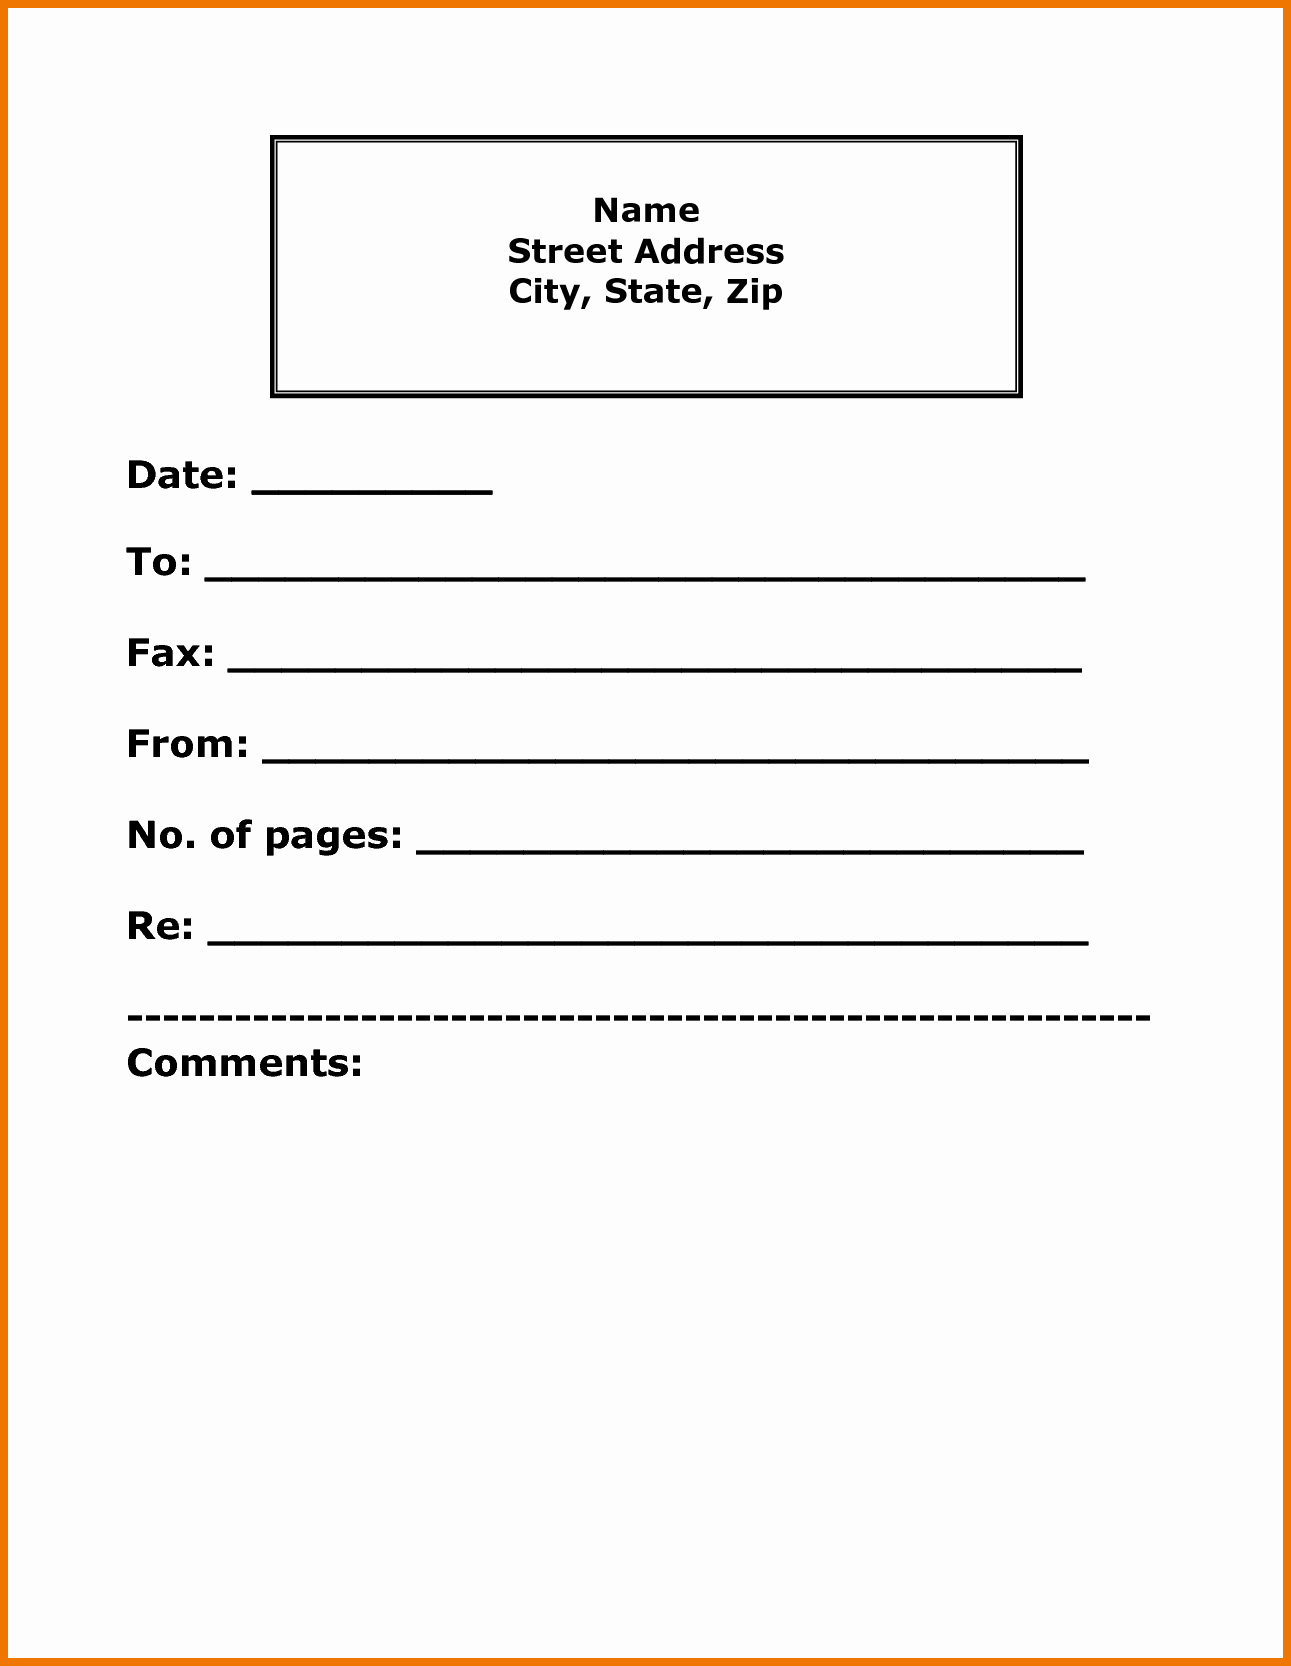 Fax Cover Sheet format Lovely Fax Cover Template Word Image – Fax Cover Sheet Template